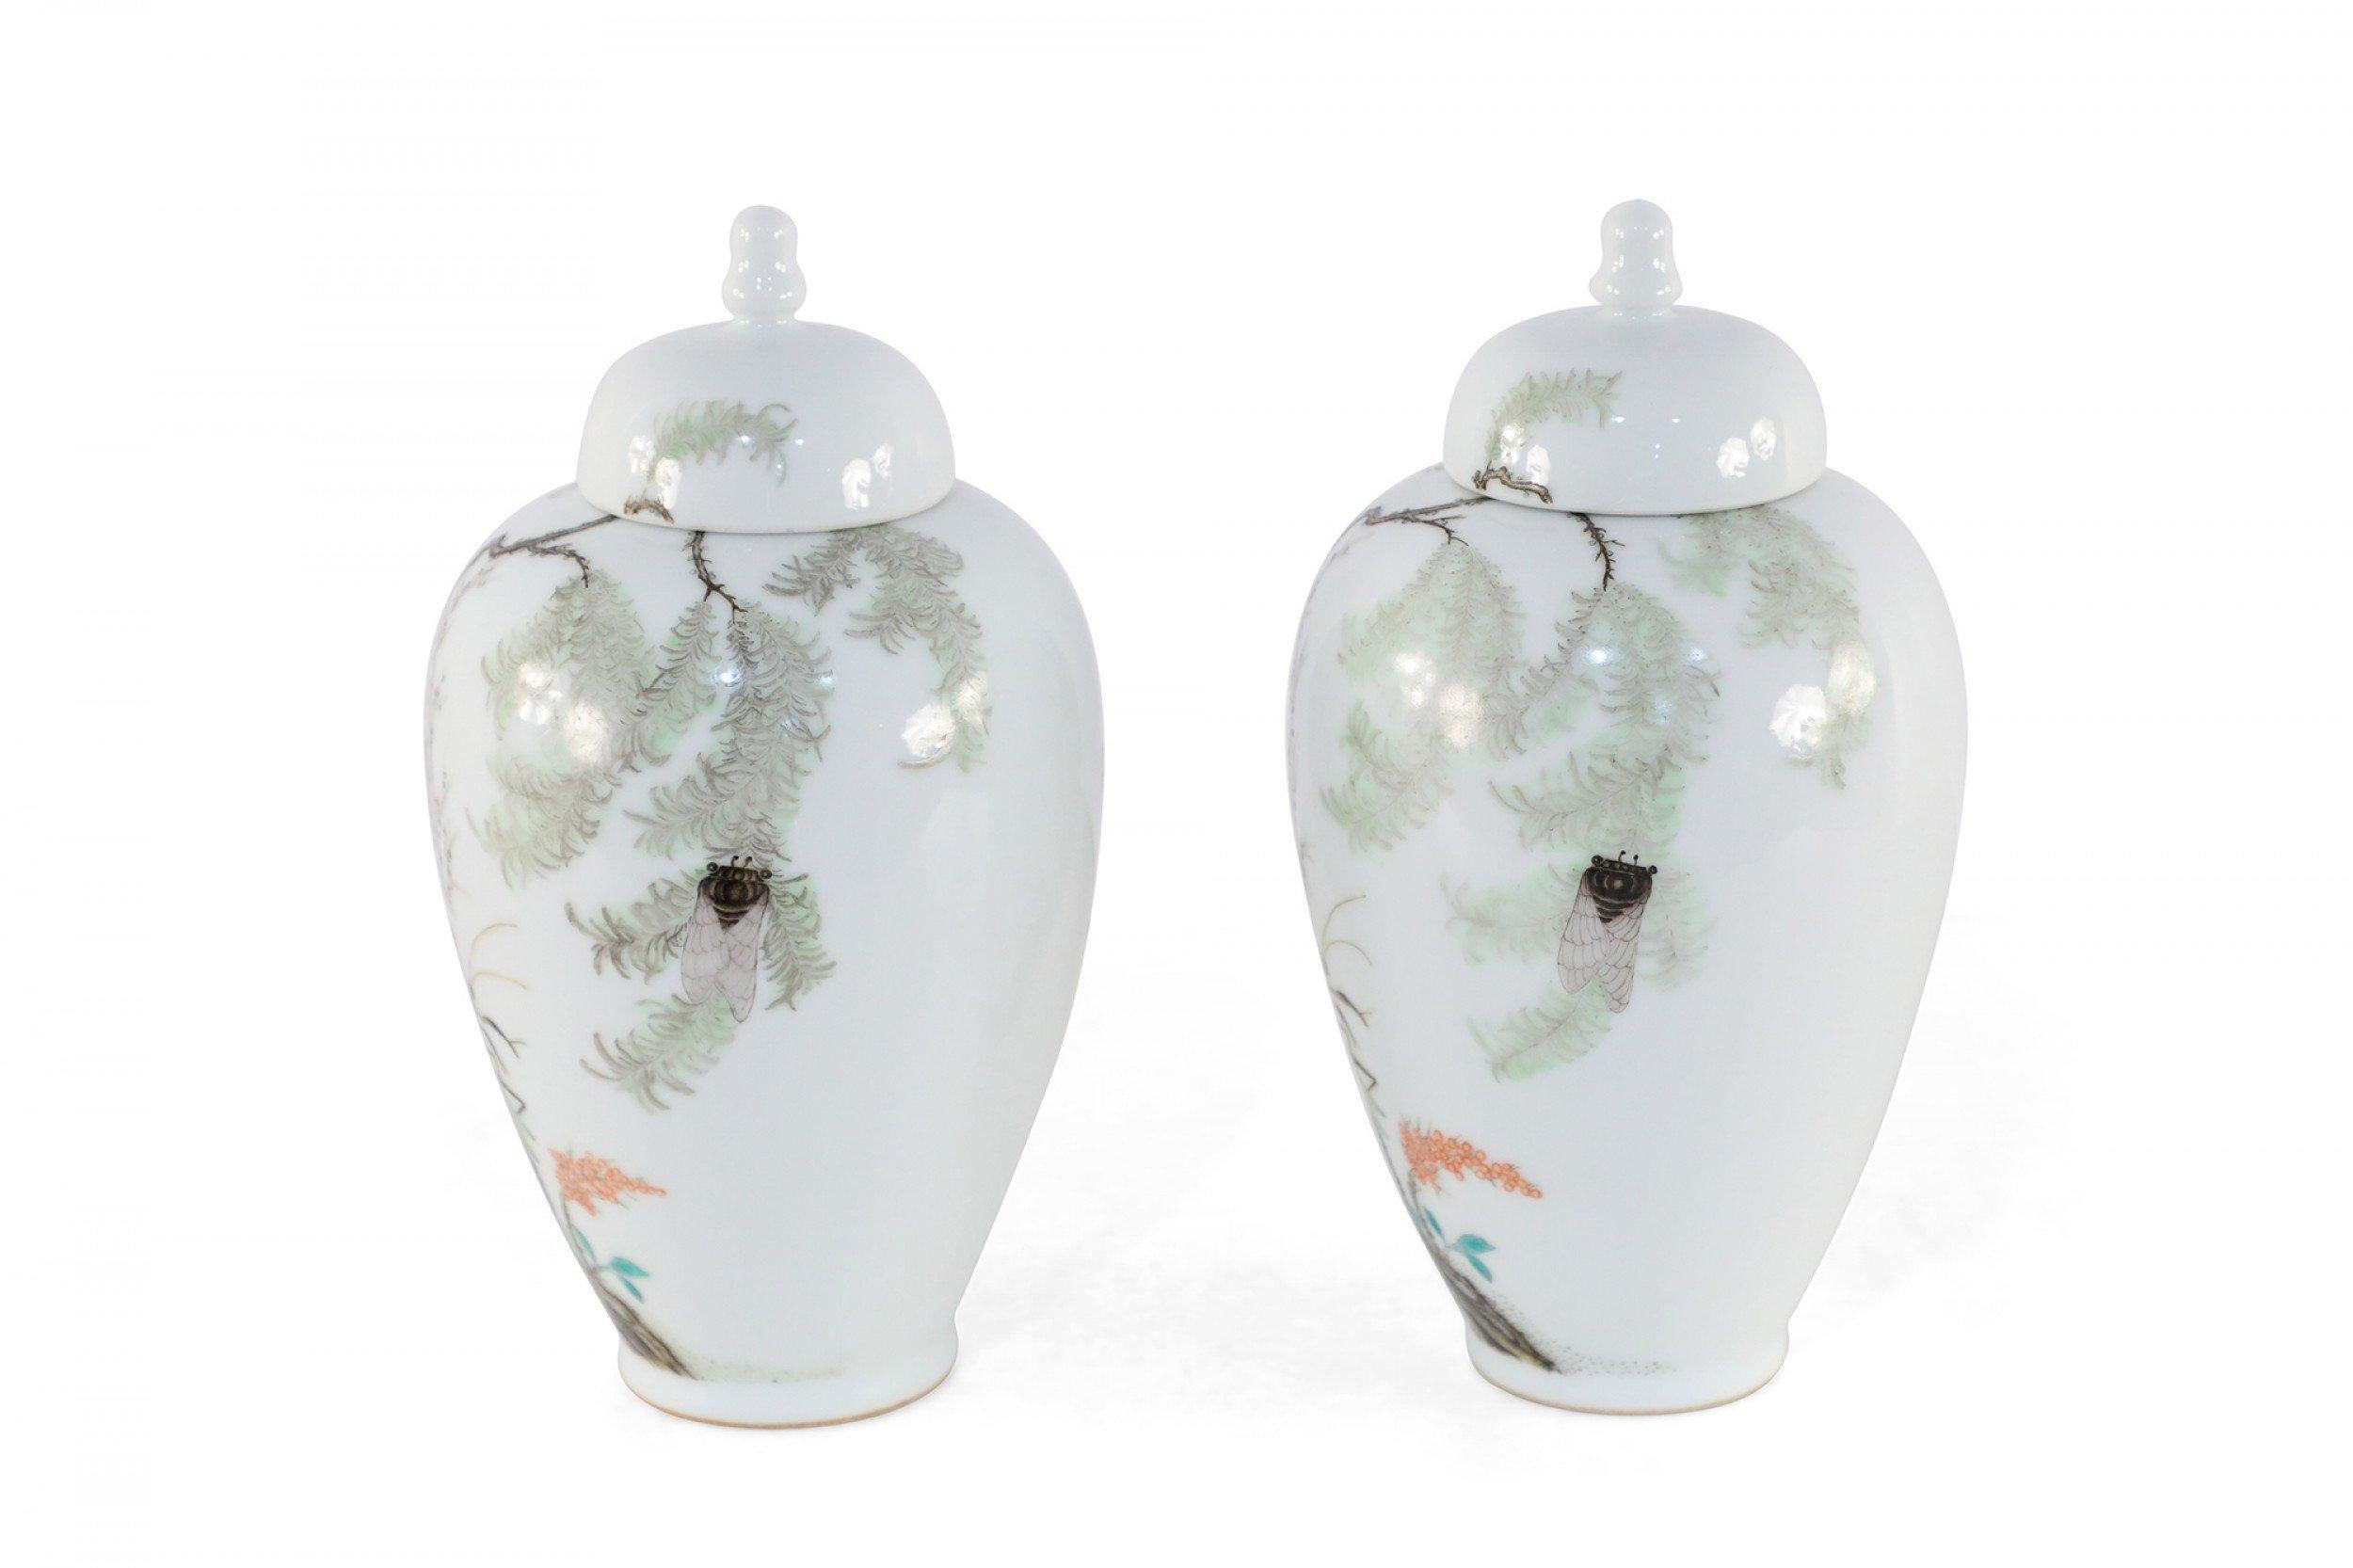 Pair of Chinese white porcelain famille rose jars painted with verdant trees and insects with characters on the backs, finished with finial-topped lids.